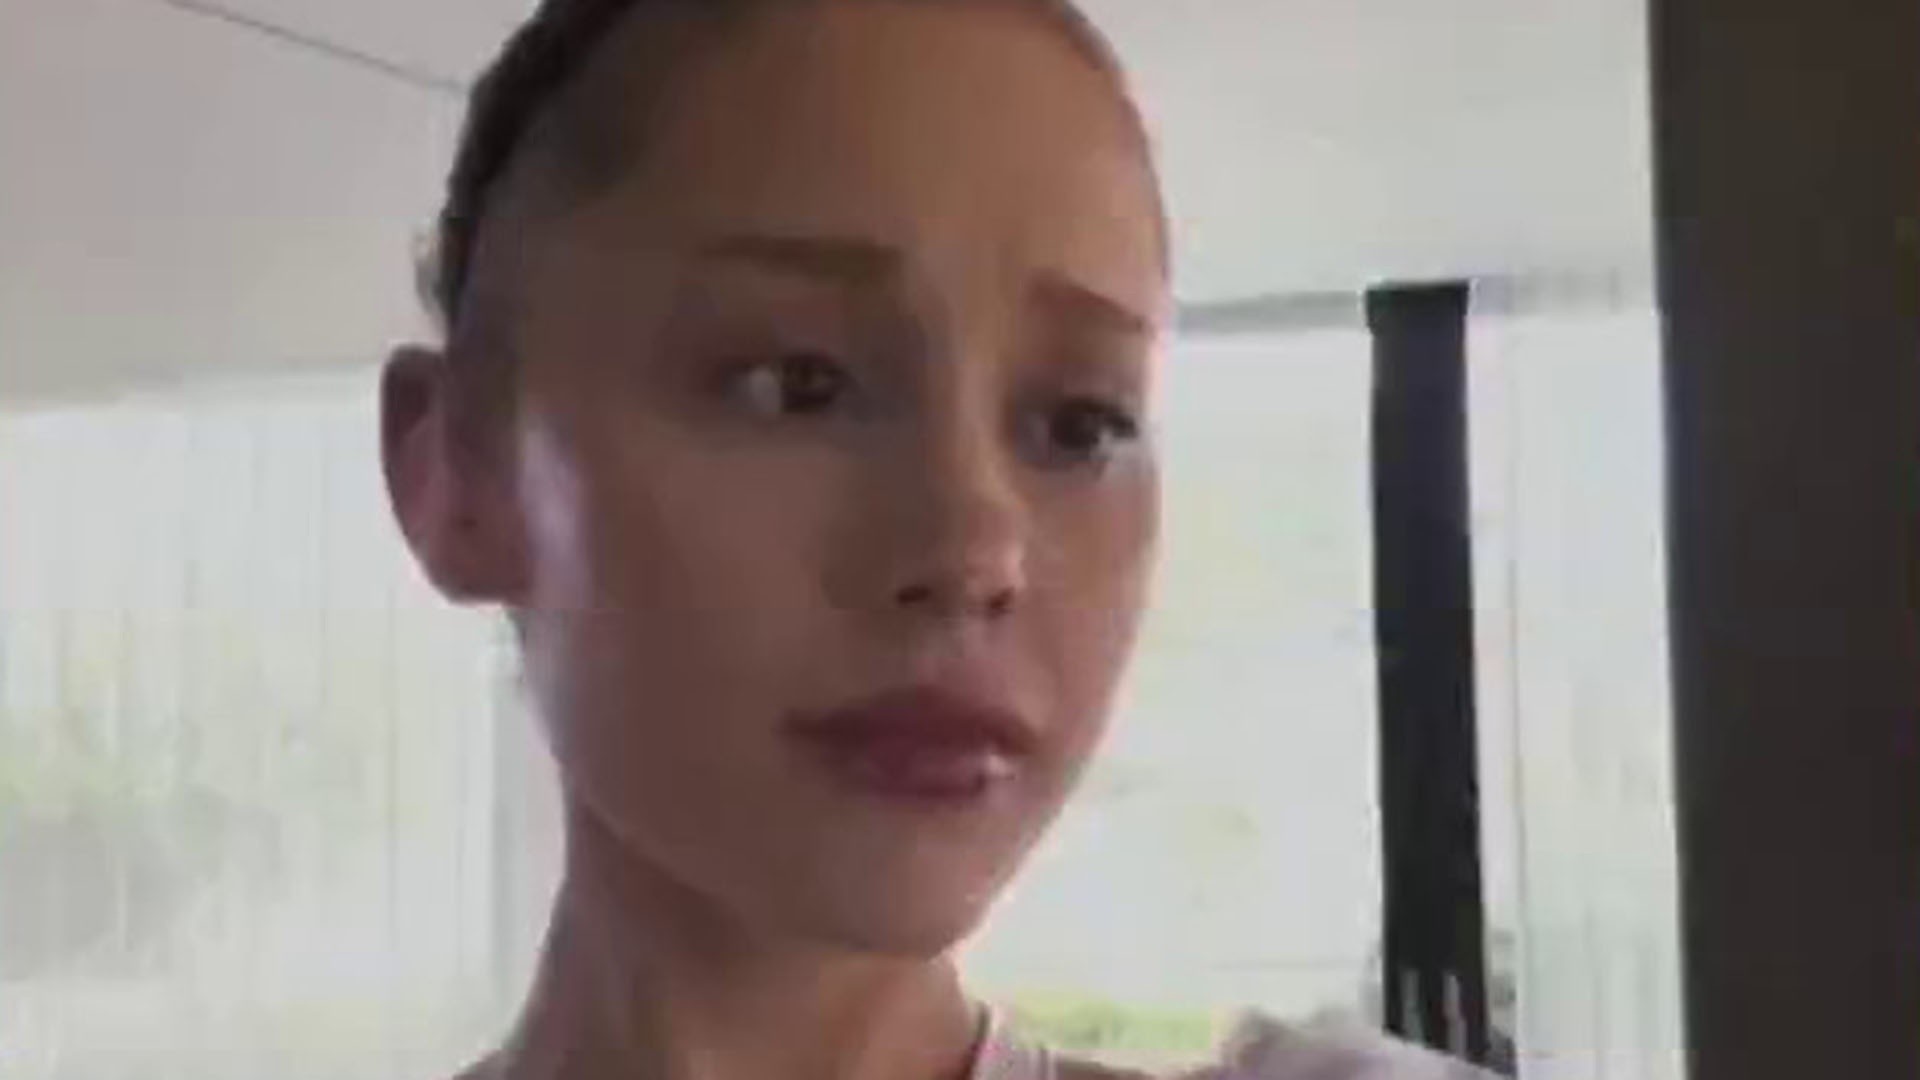 Ariana Grande's viral video reminds us why body comments can be especially  harmful - CBS News